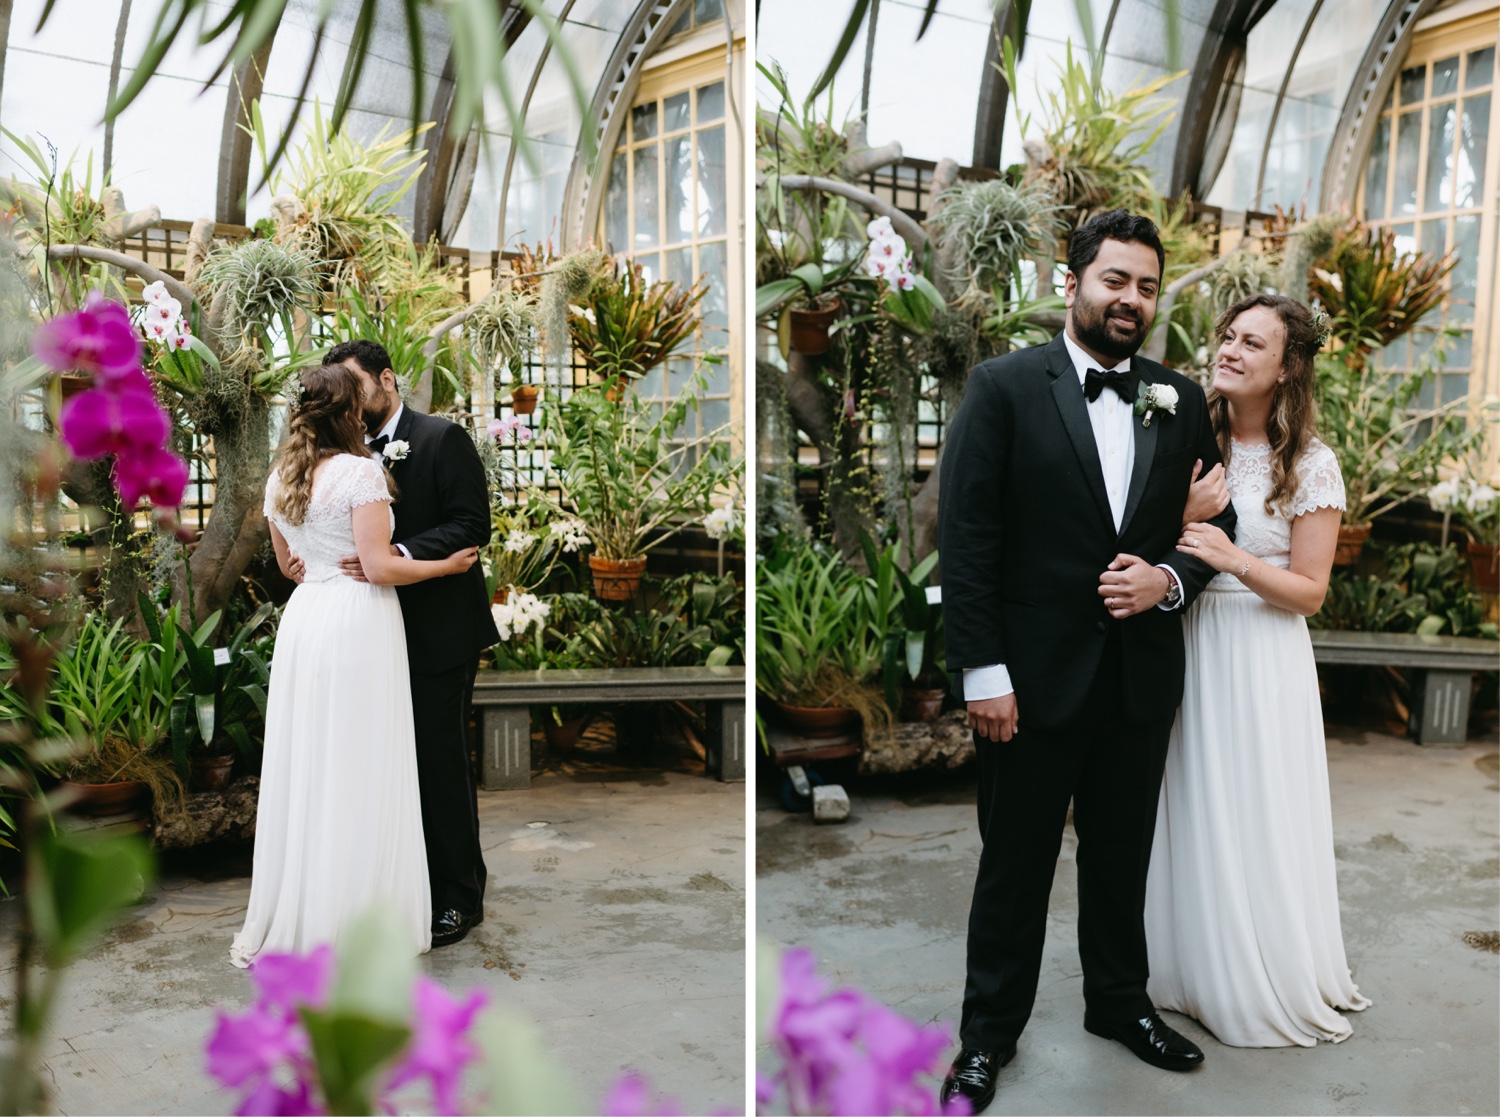 bride and groom wedding day kissing in greenhouse surrounded by desert flora and purple orchids